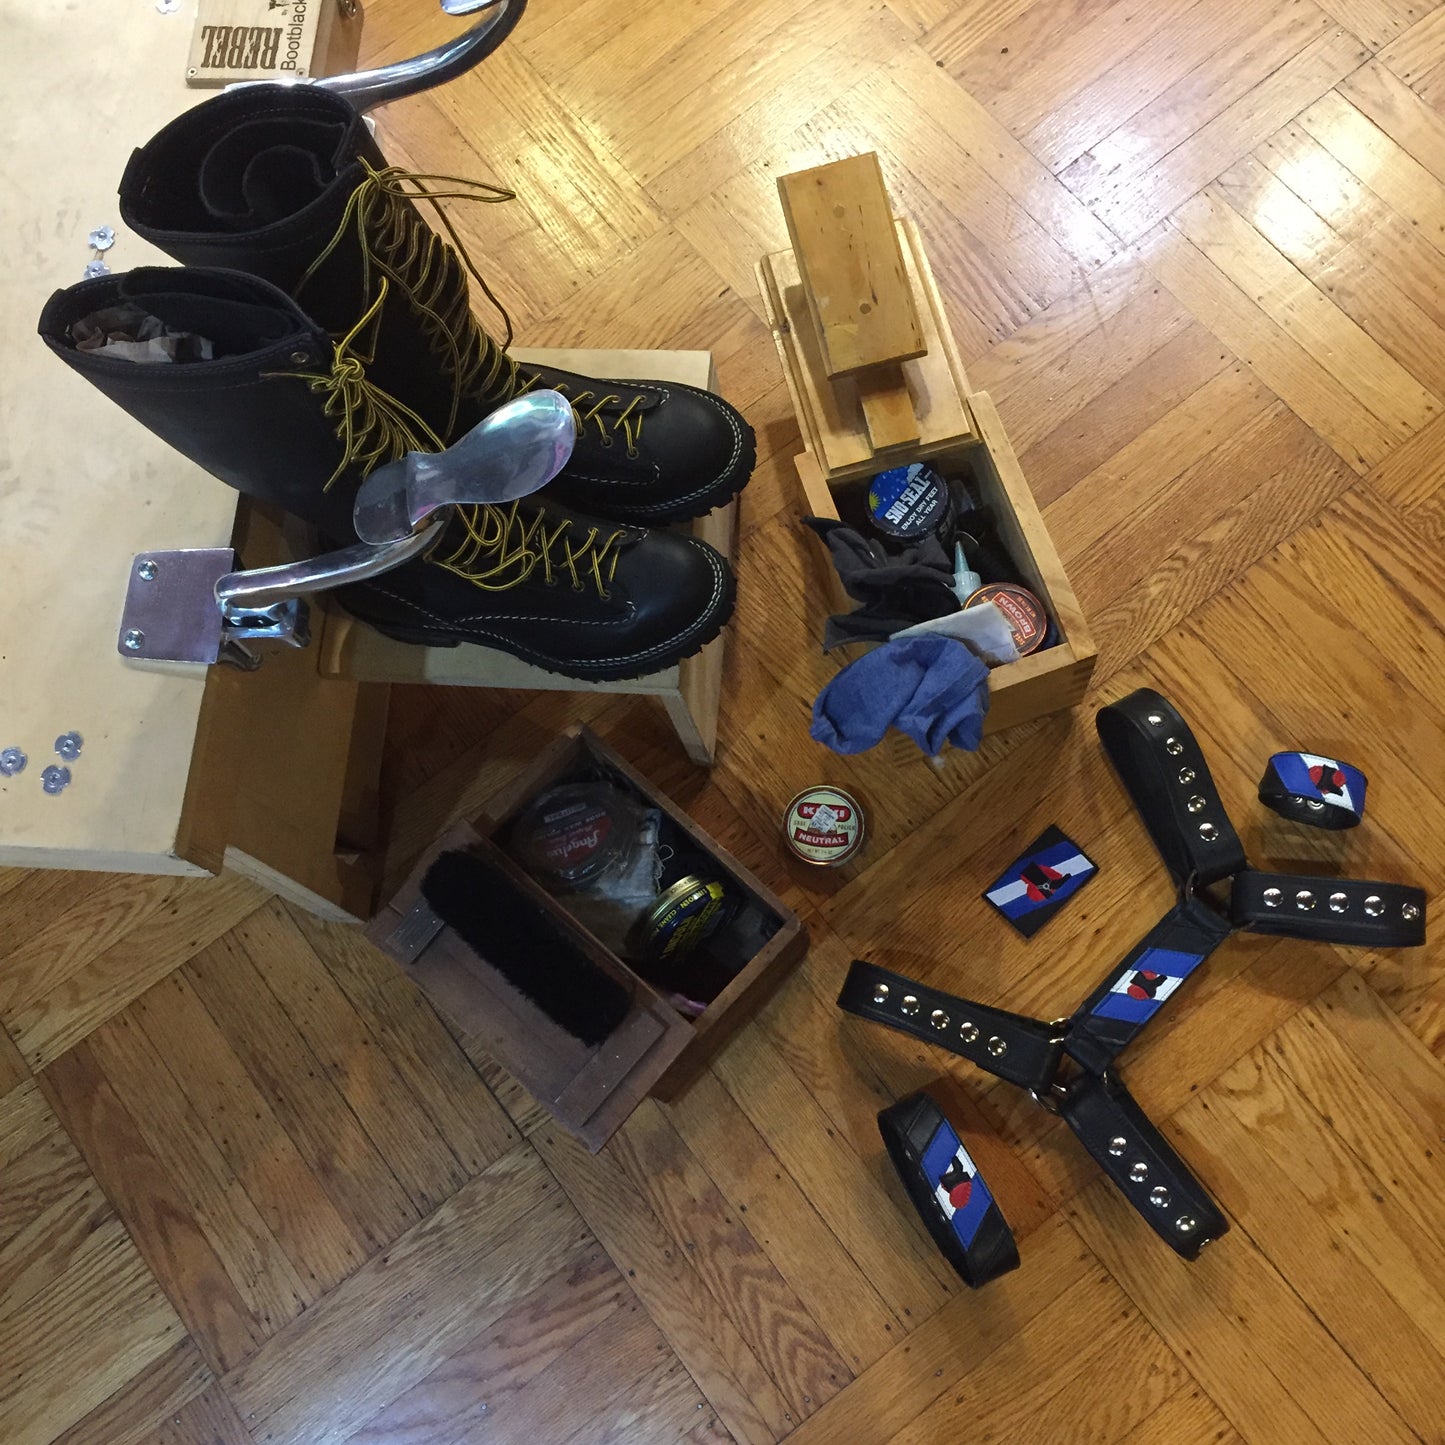 A display of bootblack materials along with the bootblack pride accessories; wrist cuff, leather patch, arm band and harness flag attached to a harness.